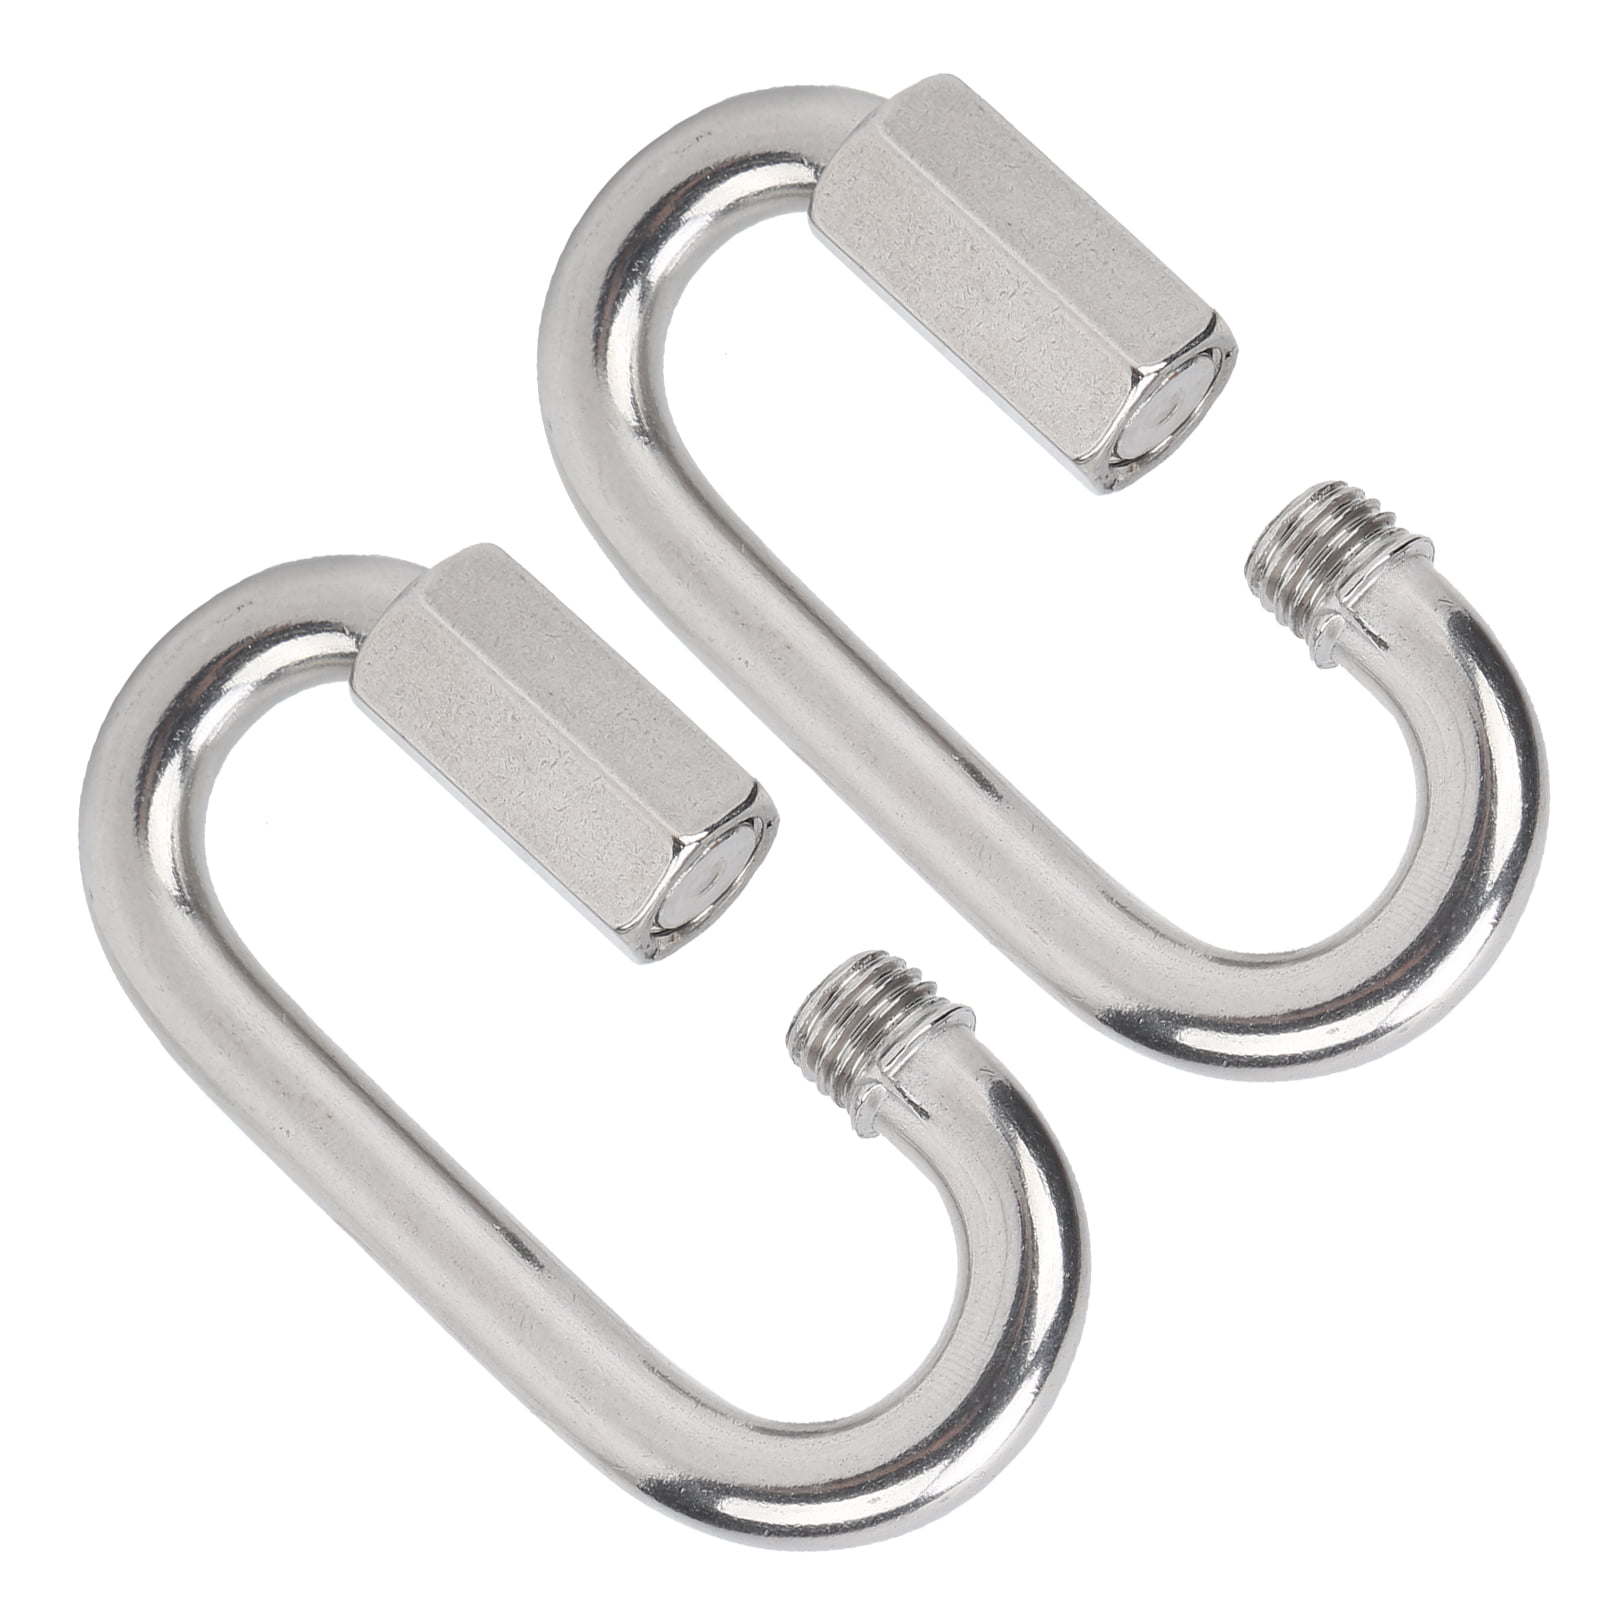 Stainless Steel Screw Lock Climbing Gear Carabiner Quick Links Safety Snap Ho_ma 